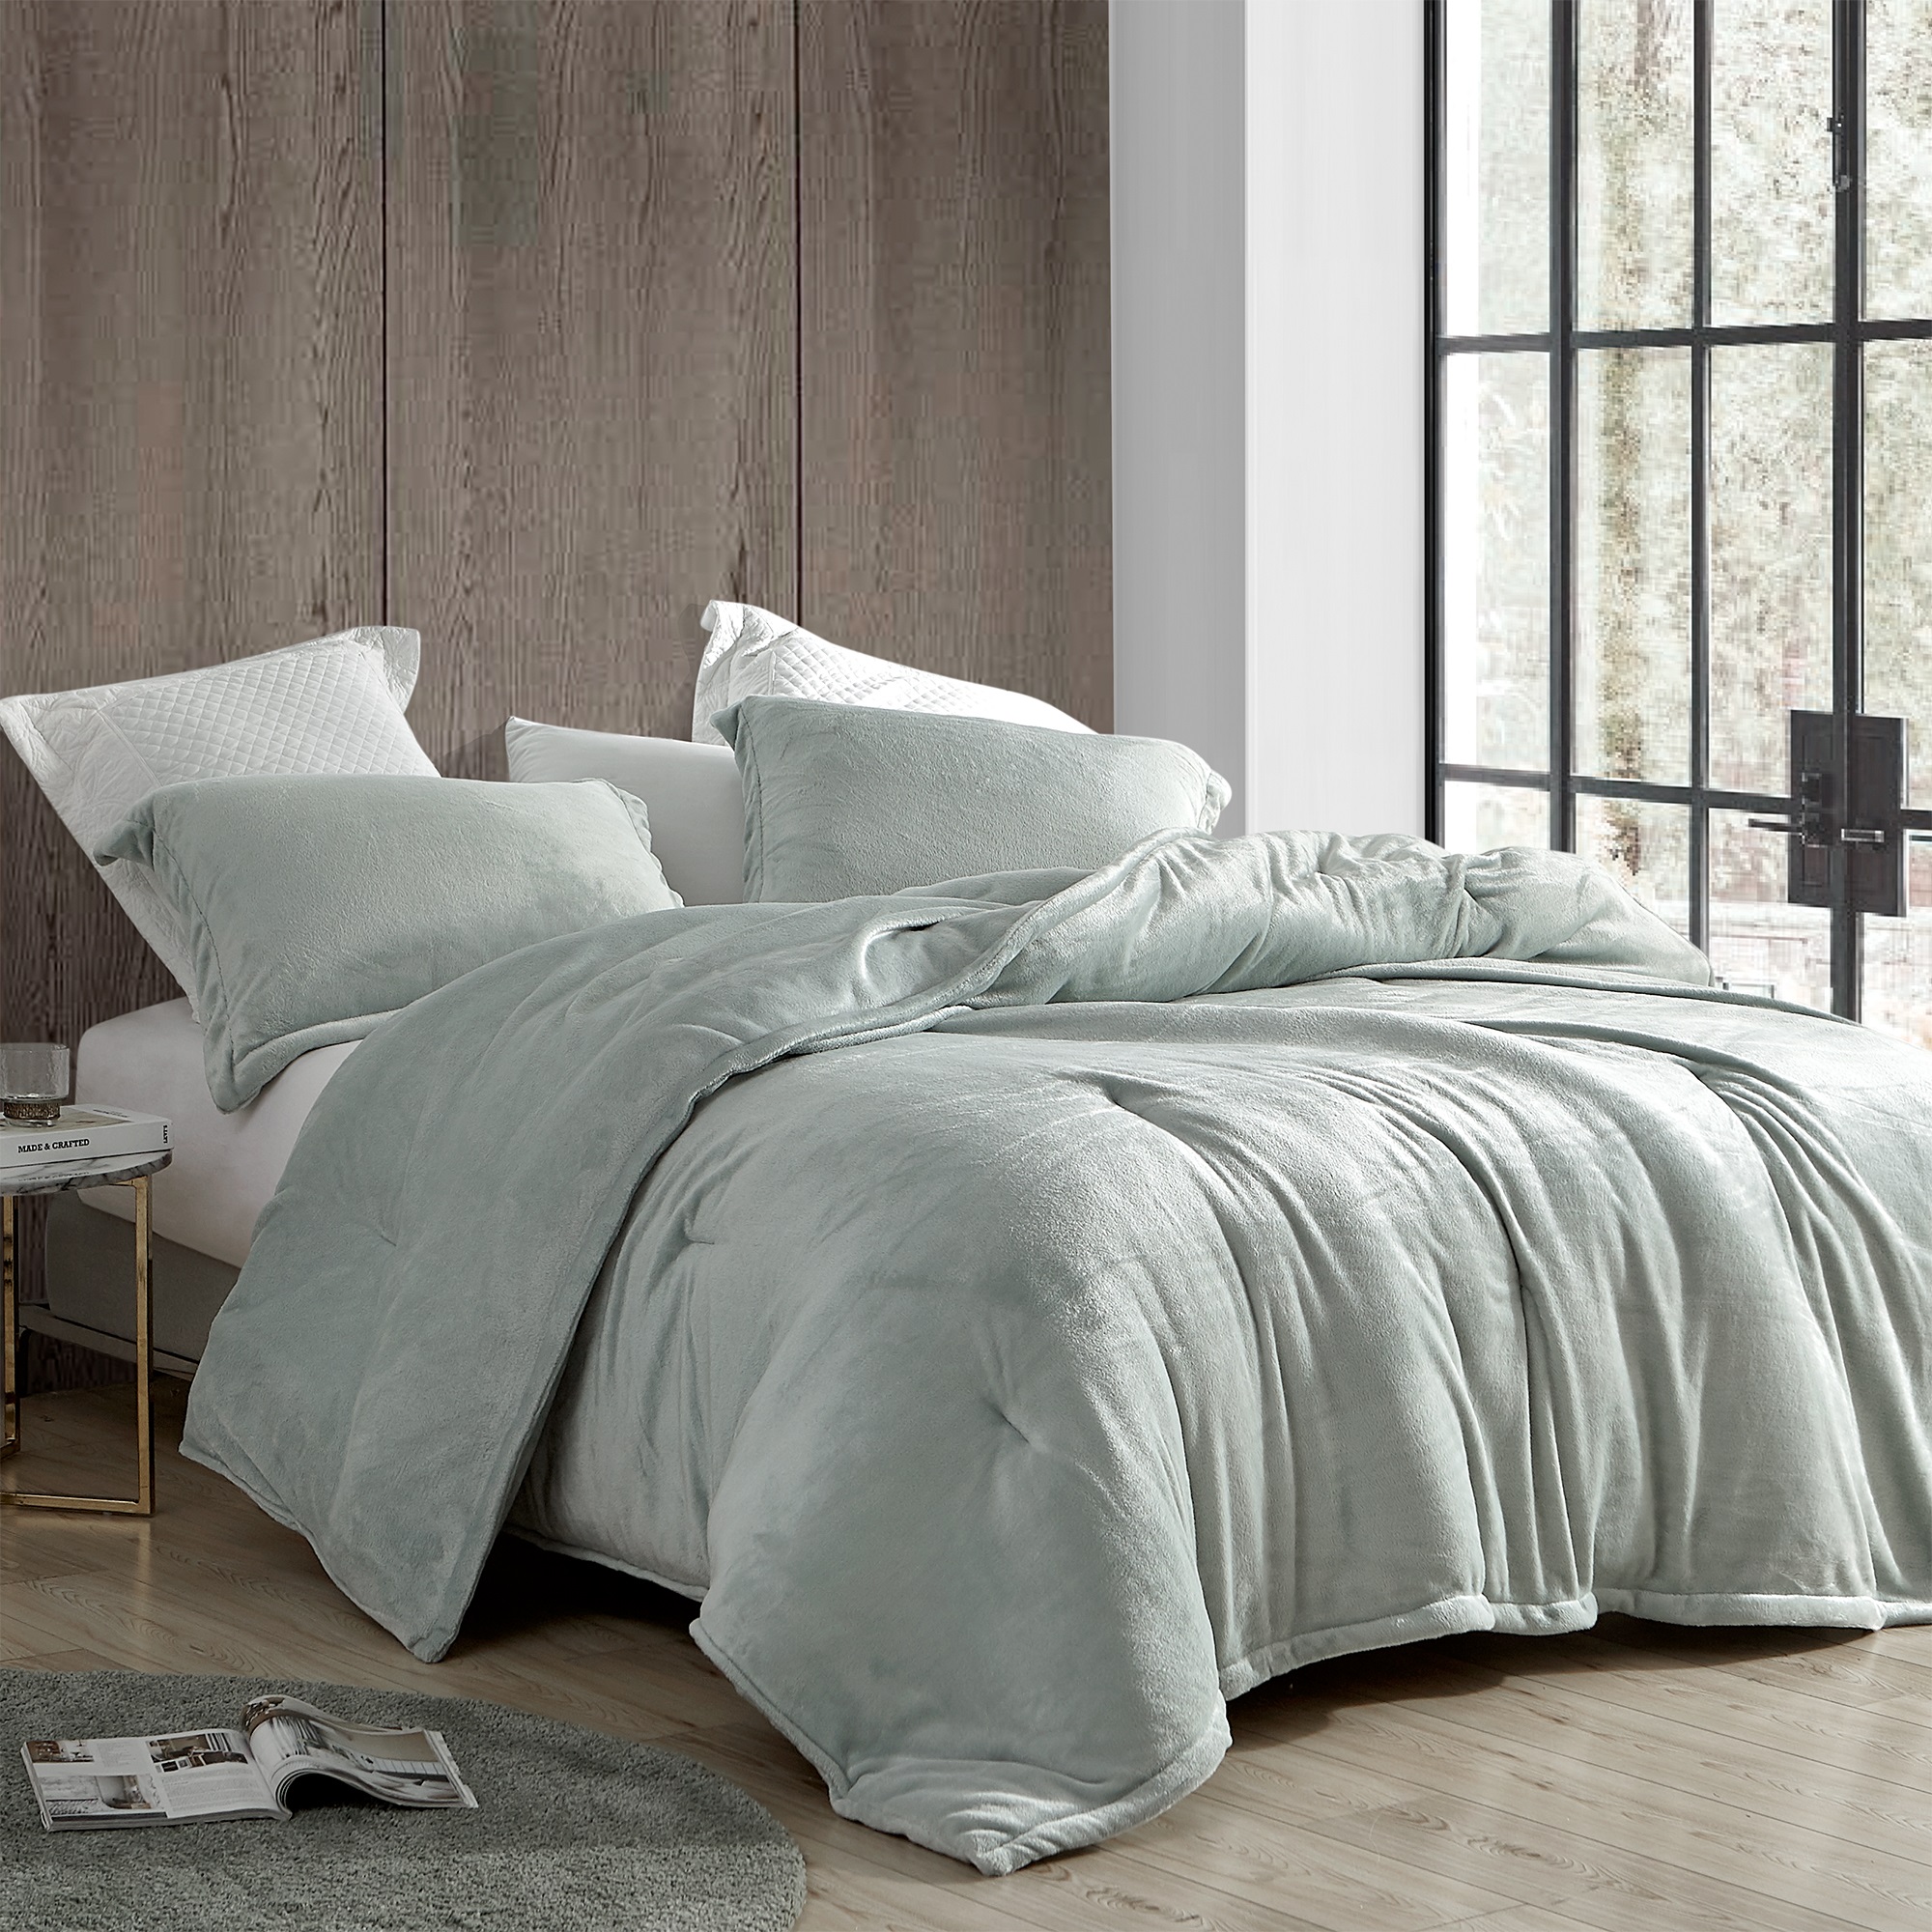 Coma Inducer Oversized Comforter - Touchy Feely - Mineral Gray